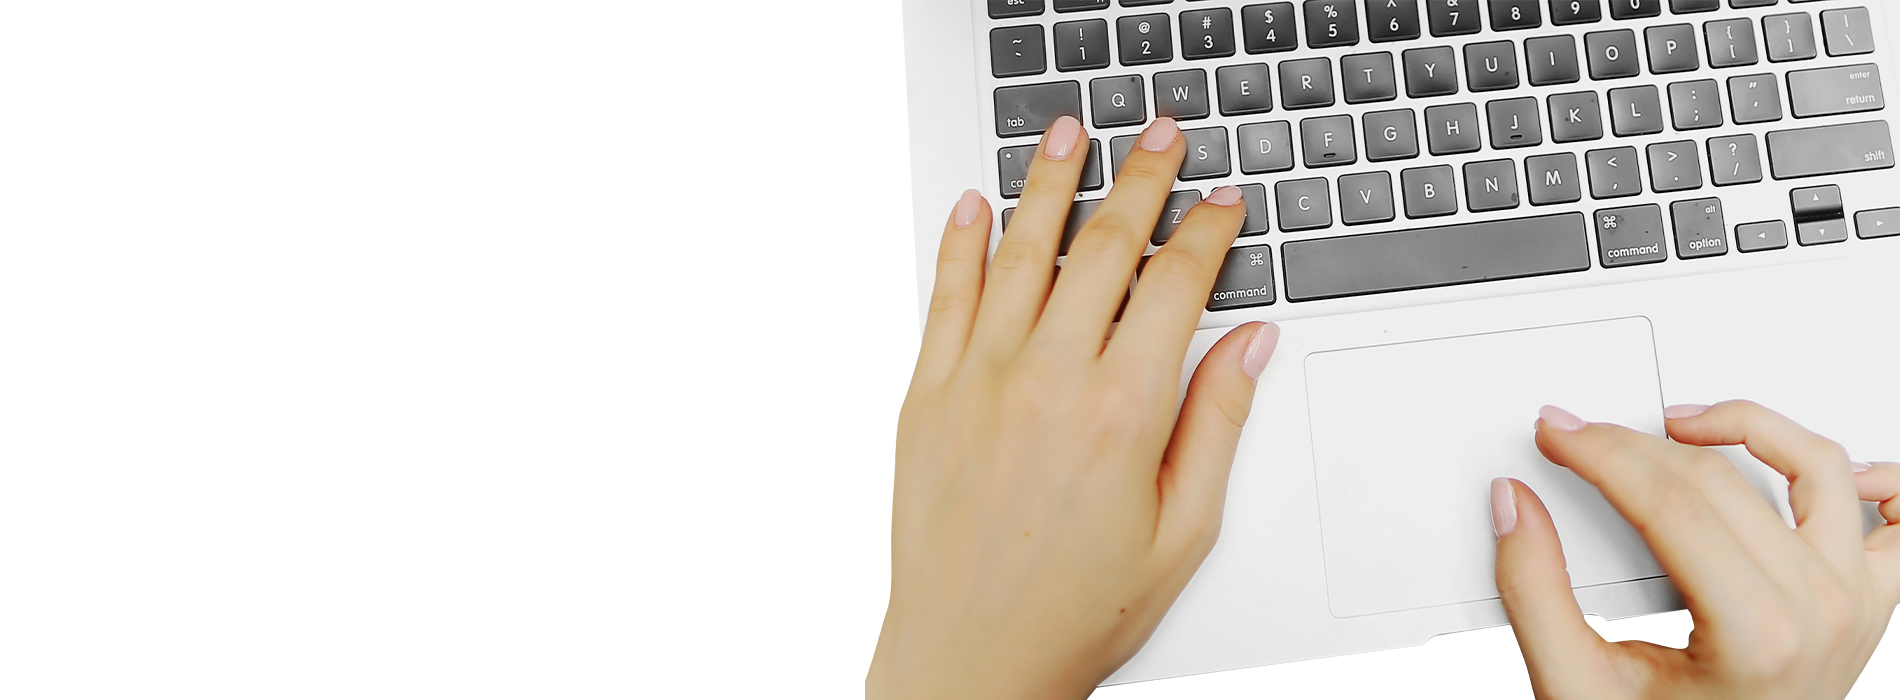 The image shows a person s hand typing on a laptop keyboard, with the laptop screen facing away from the viewer.